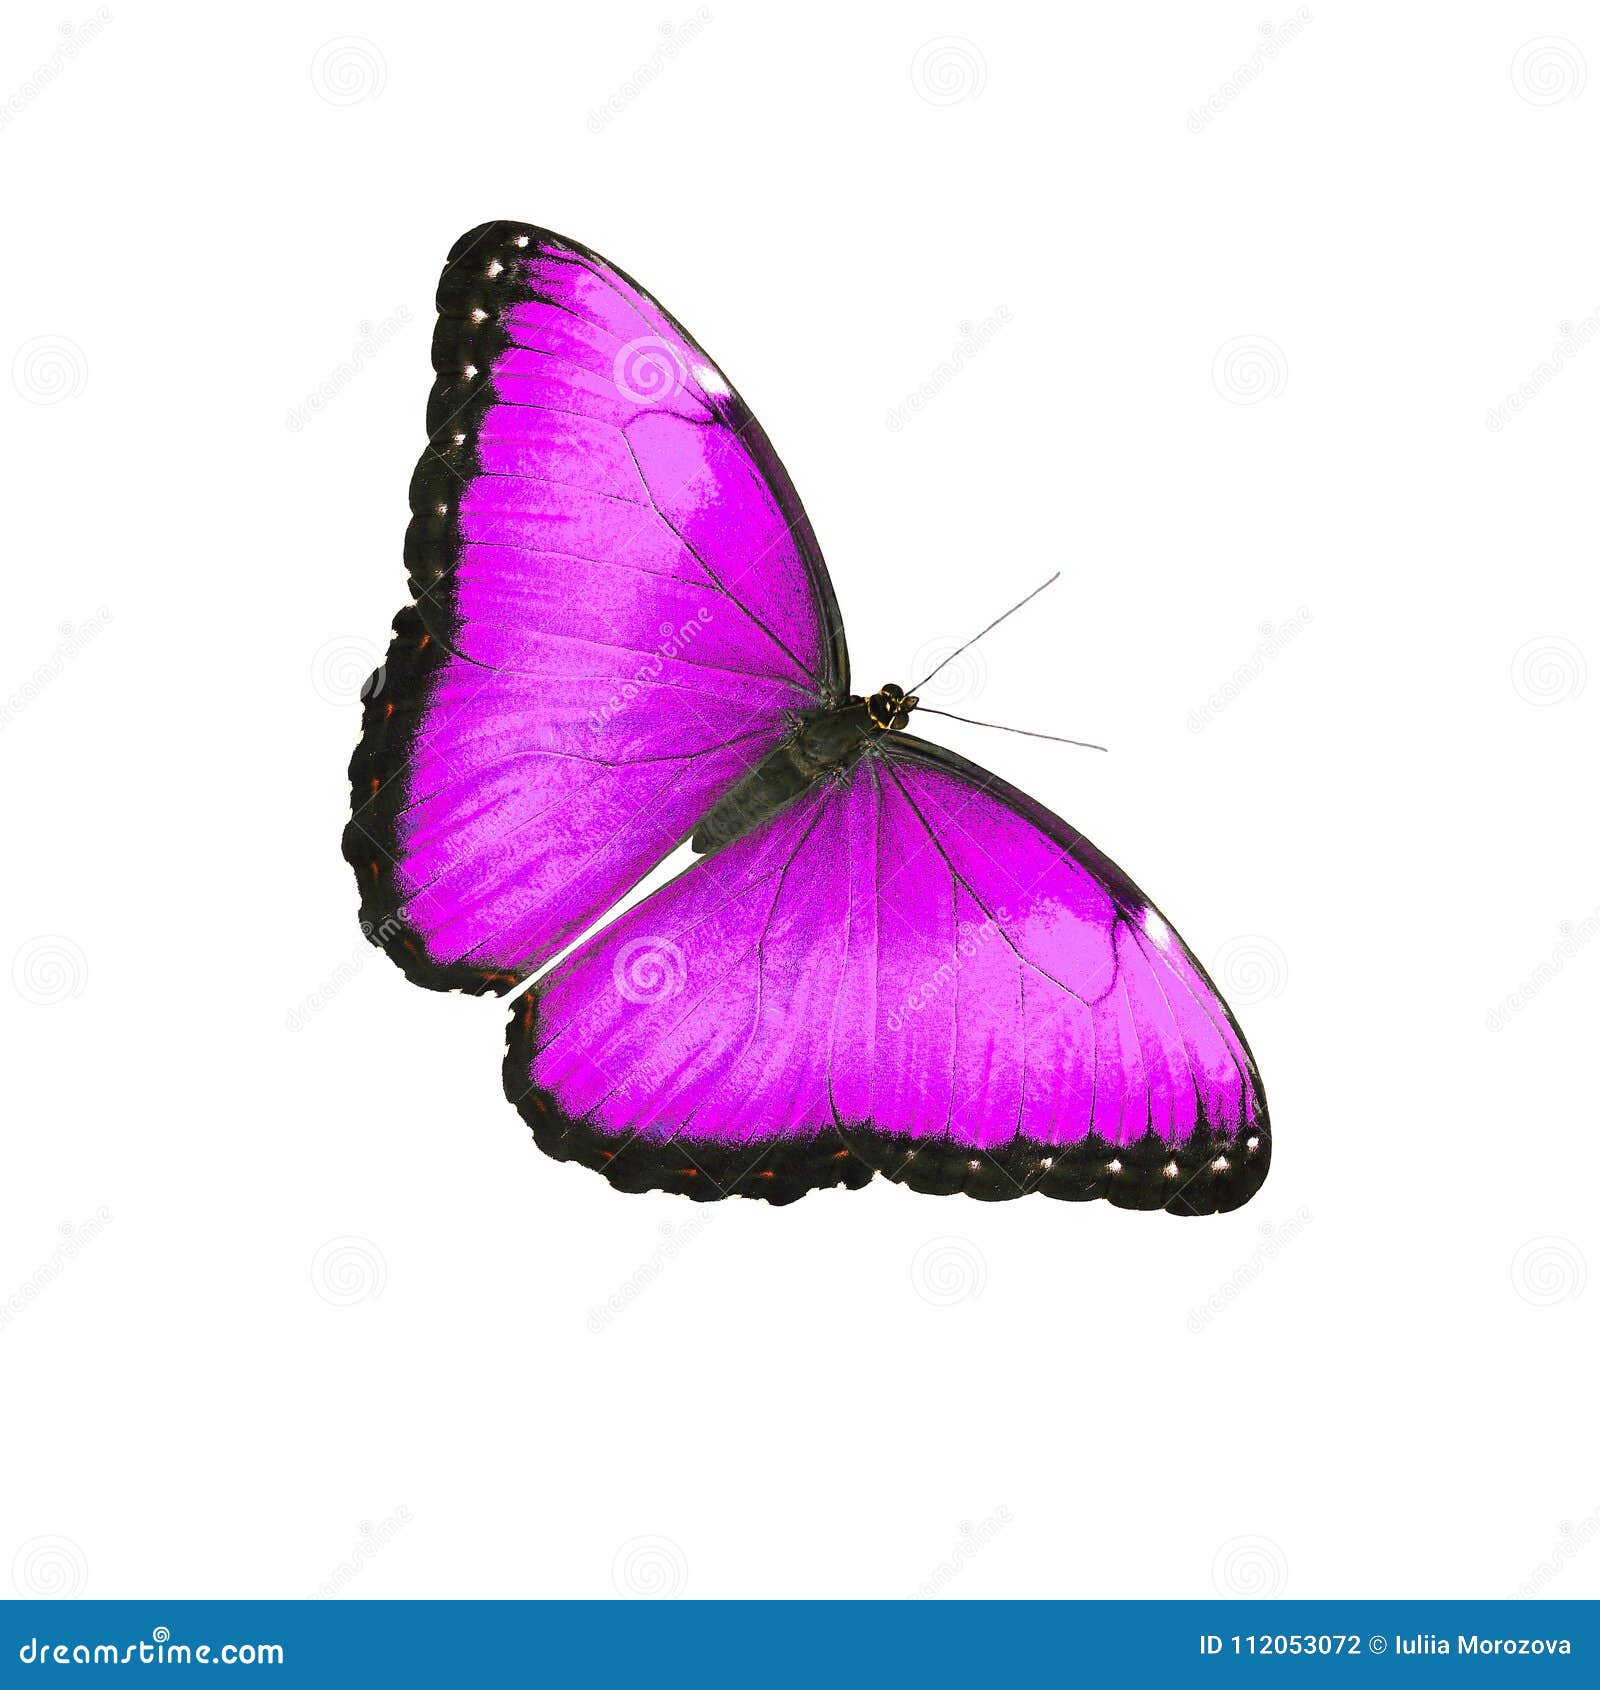 blue morpho butterfly male  on white. color change to magenta